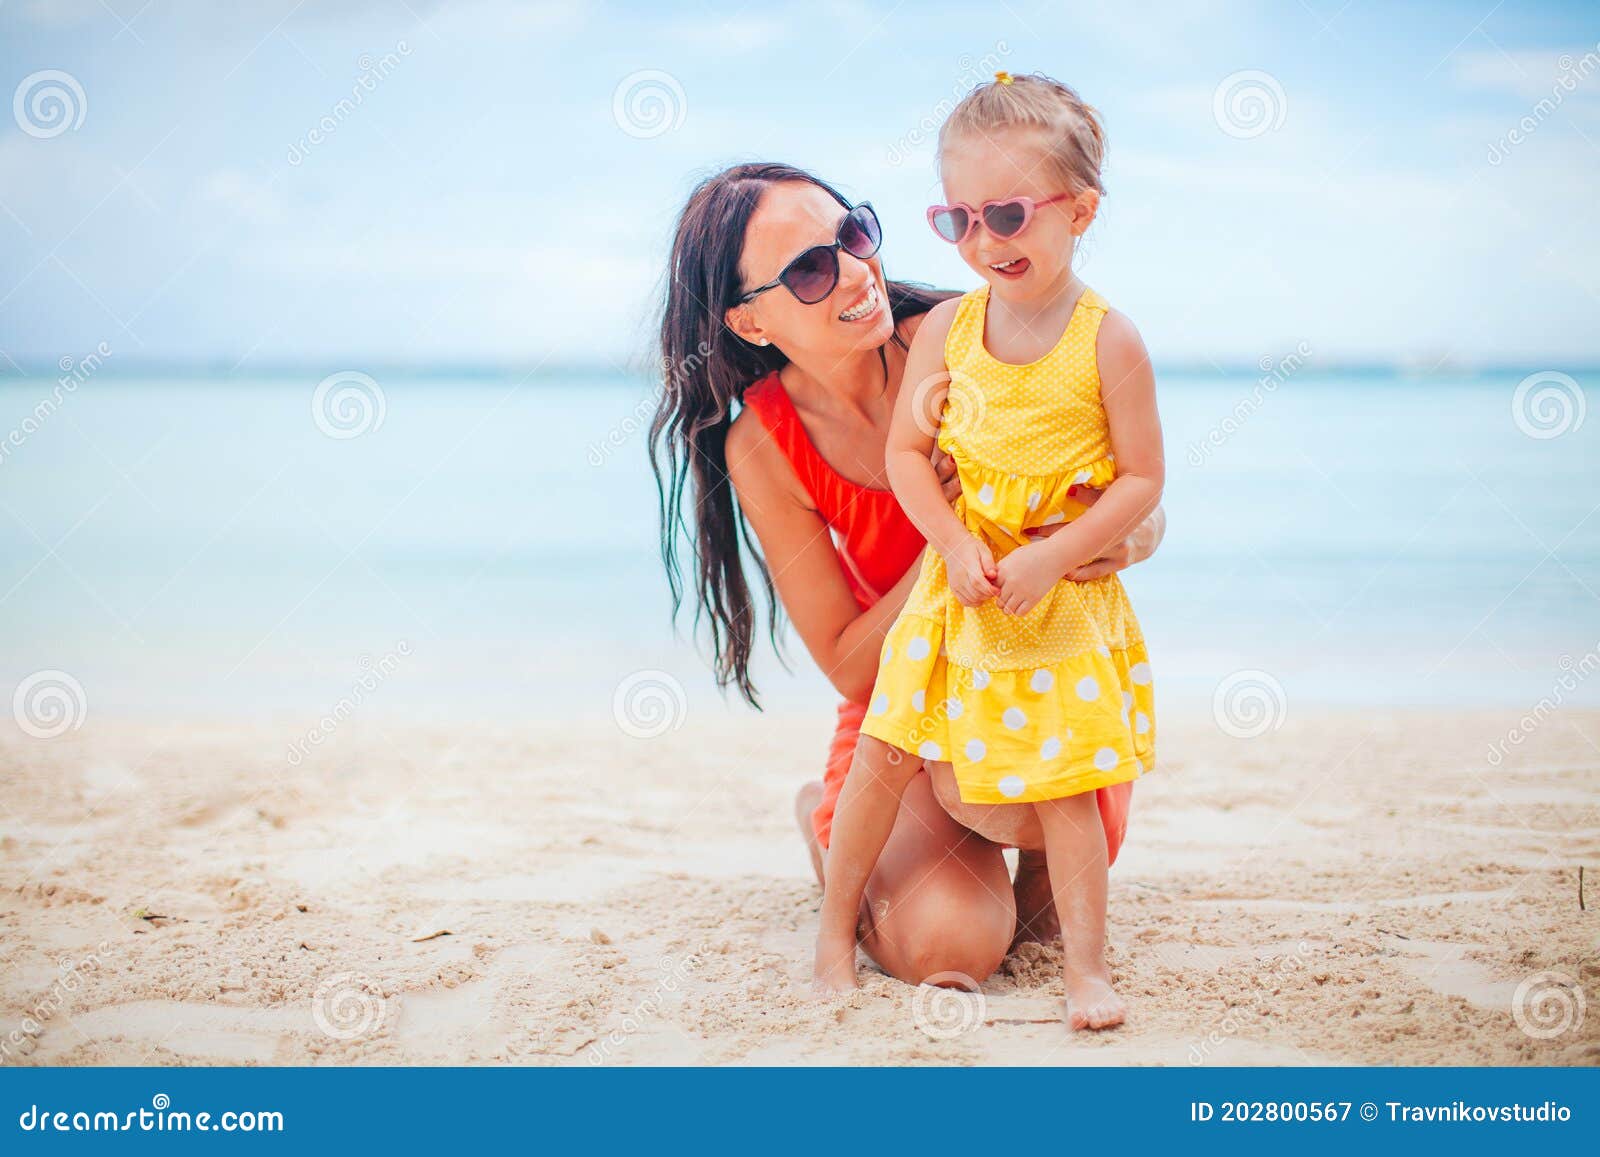 Beautiful Mother And Daughter At The Beach Enjoying Summer Vacation 